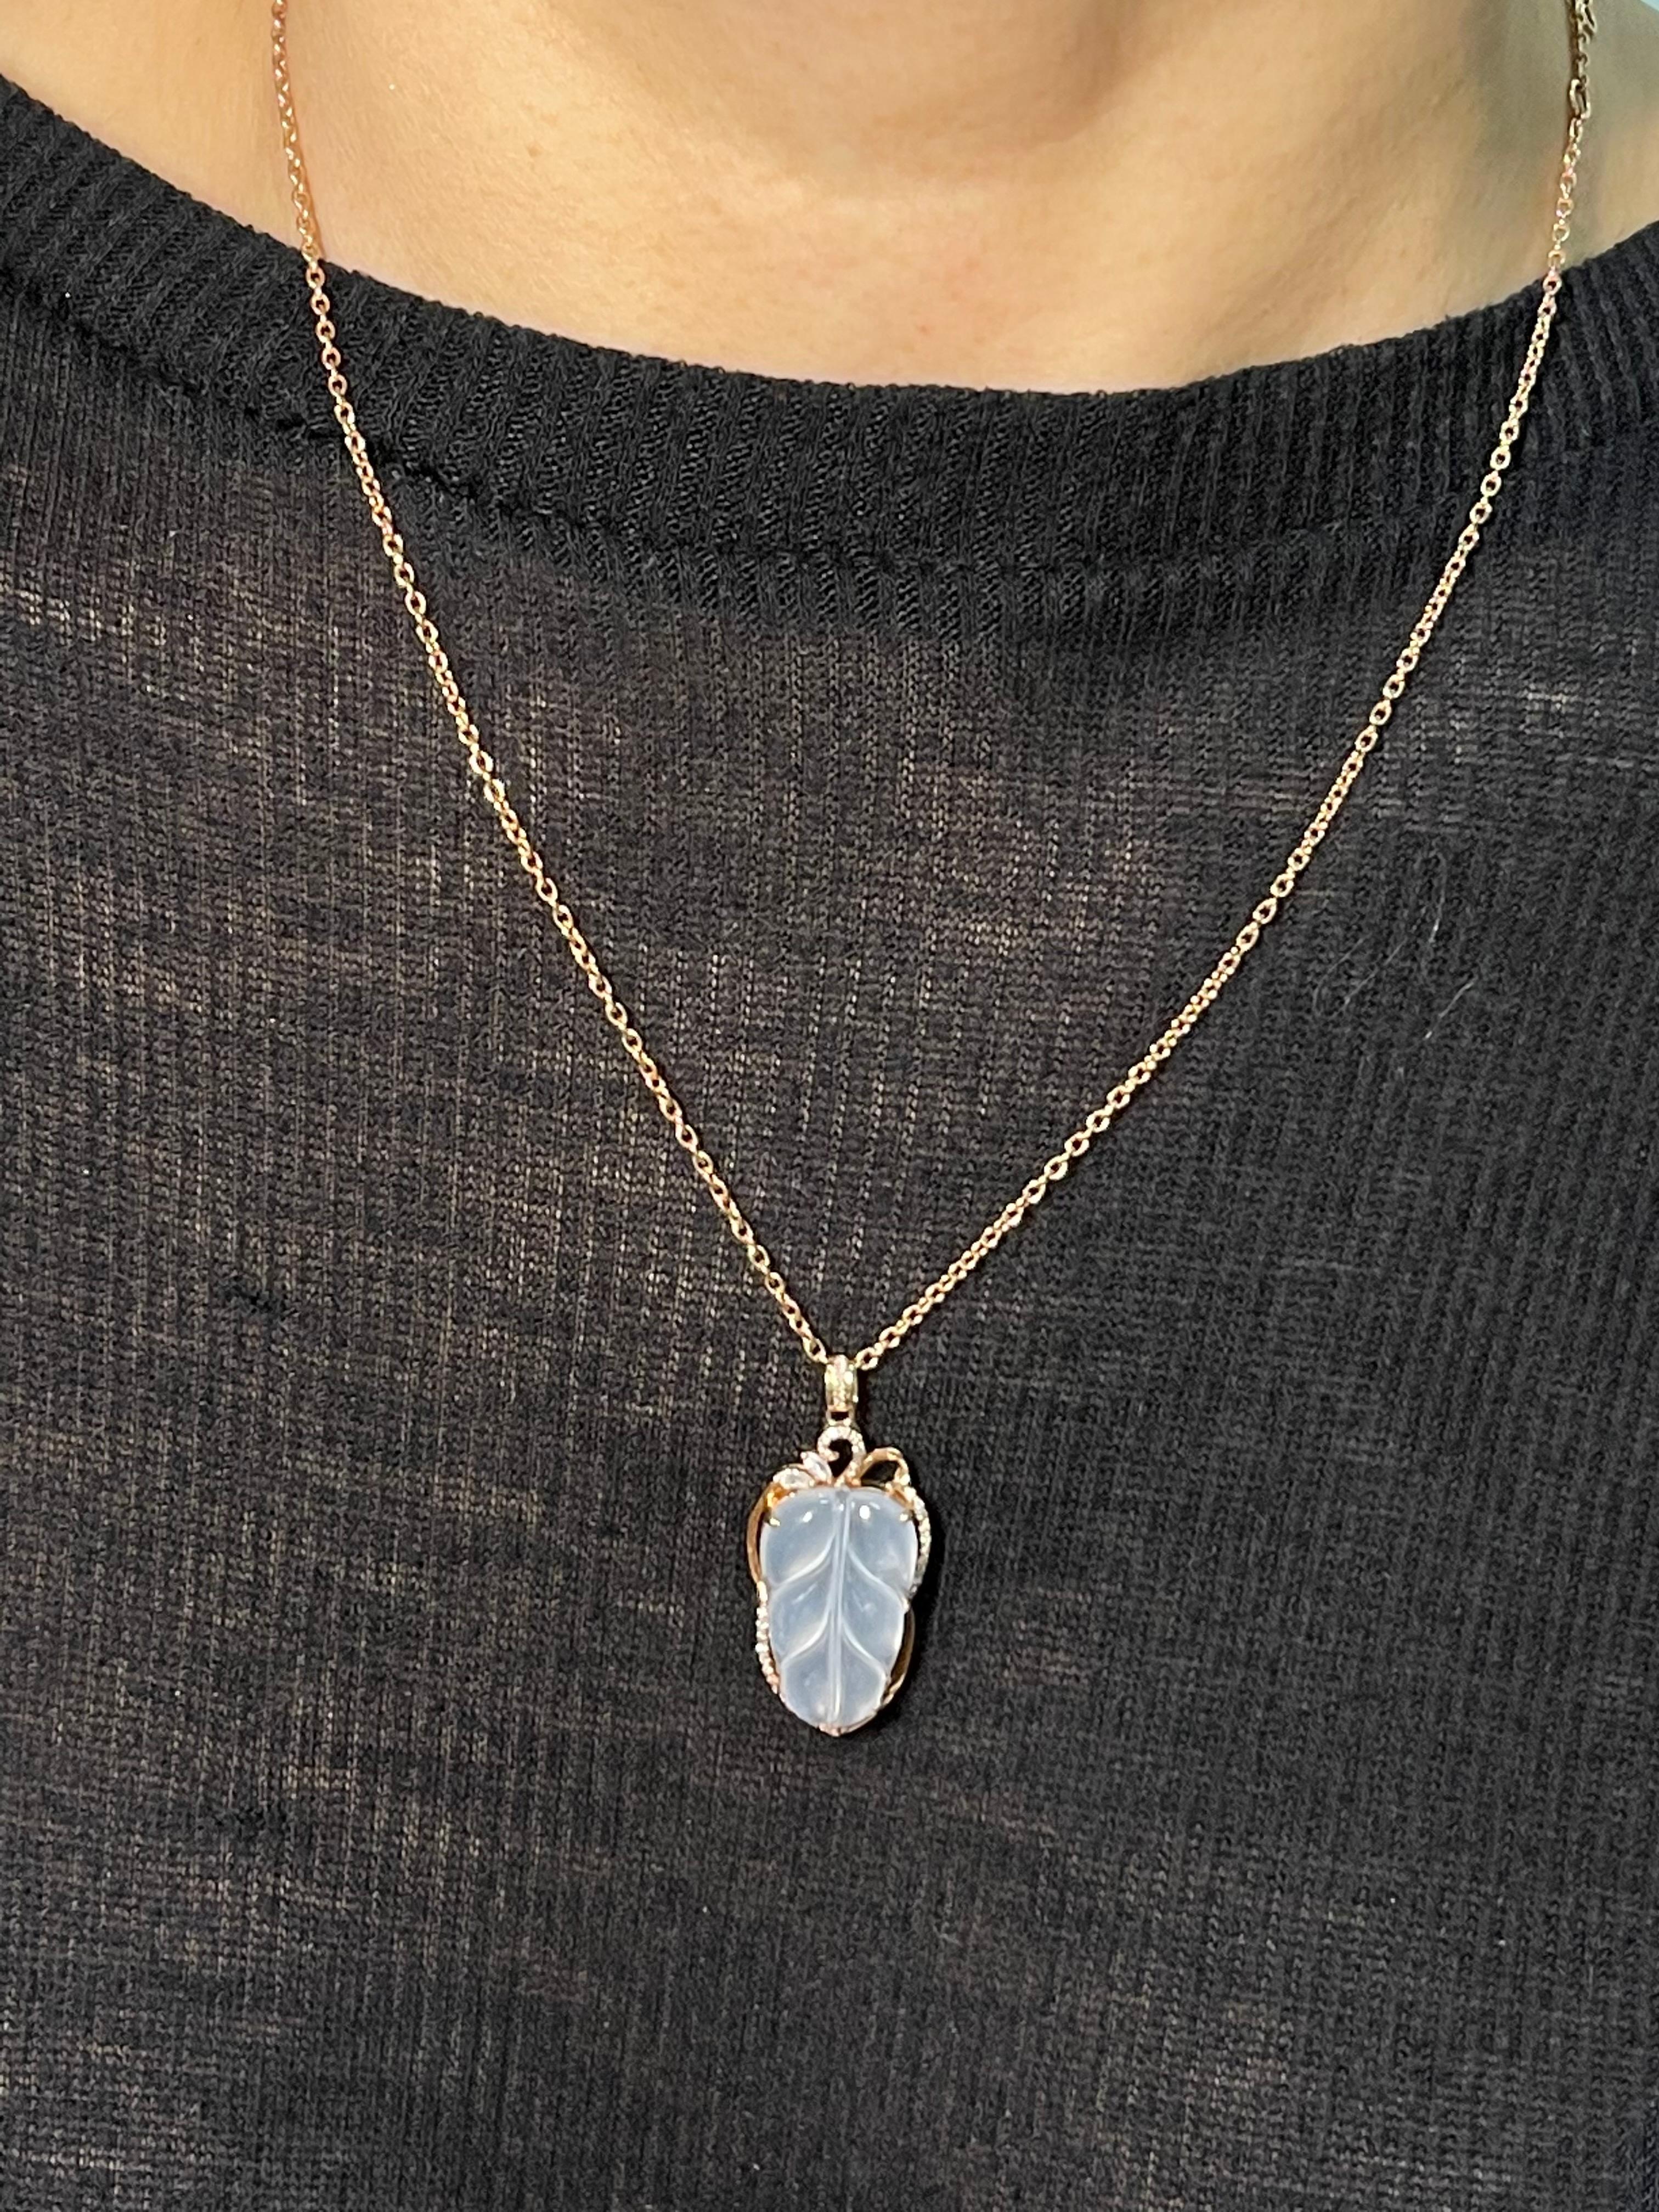 Please check out the HD video! This pendant is certified by two labs to be natural jadeite jade. The pendant is set in 18k rose gold and white diamonds. The well carved colorless icy jade leaf motif has an estimated 0.15 cts of diamonds in the